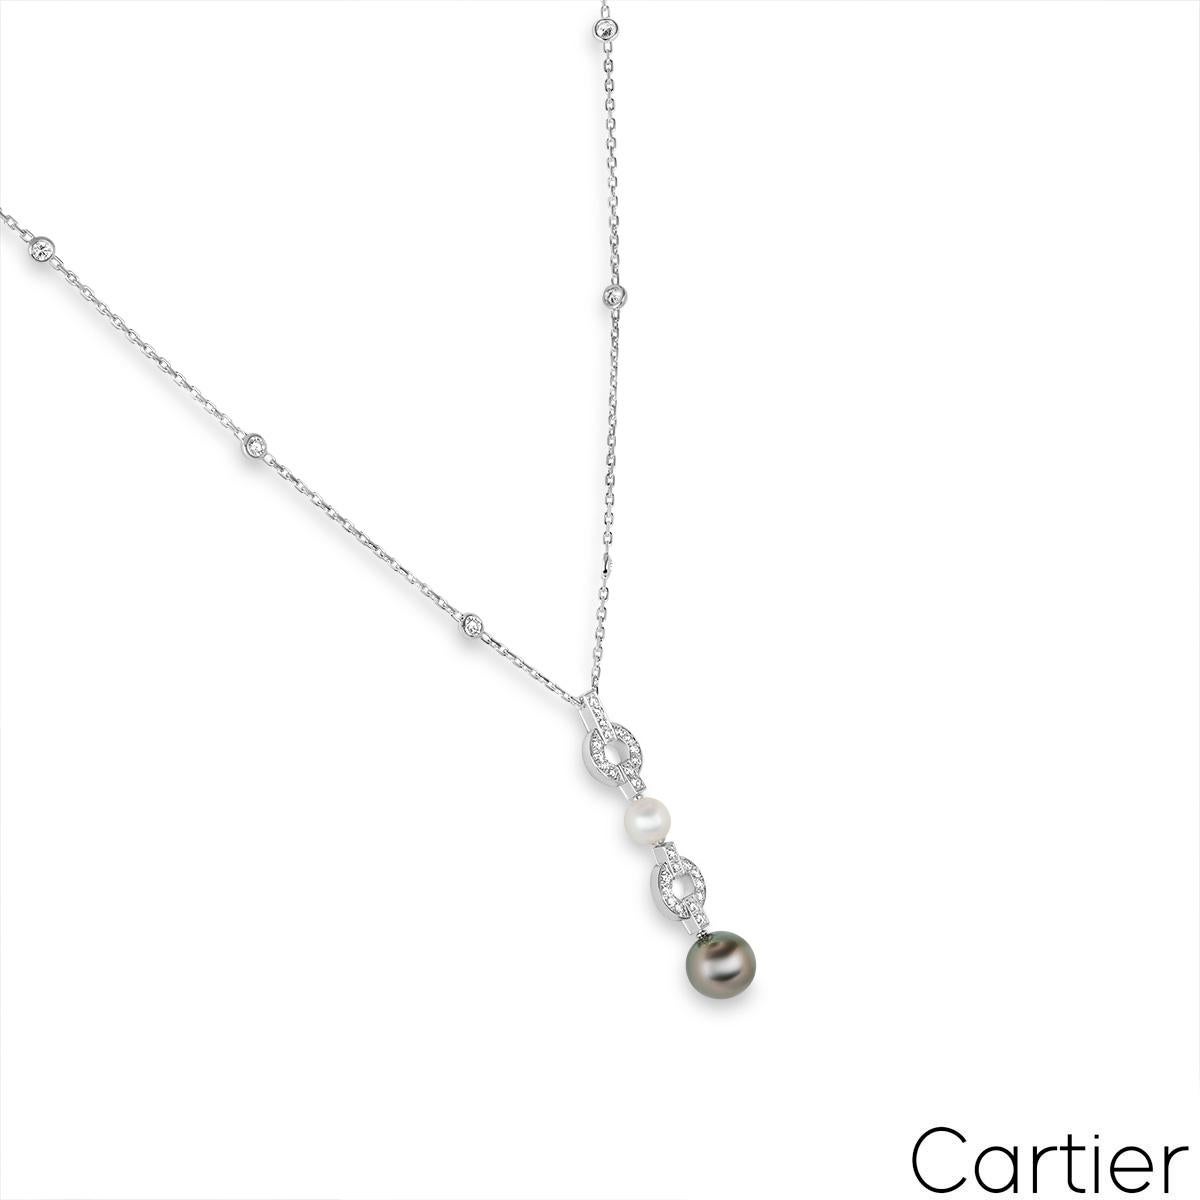 A beautiful 18k white gold pearl and diamond necklace by Cartier from the Himalia collection. The pendant alternates between a diamond set circular motif and a pearl. The first pearl measures 7mm in width and displays a white hue with a silvery-pink